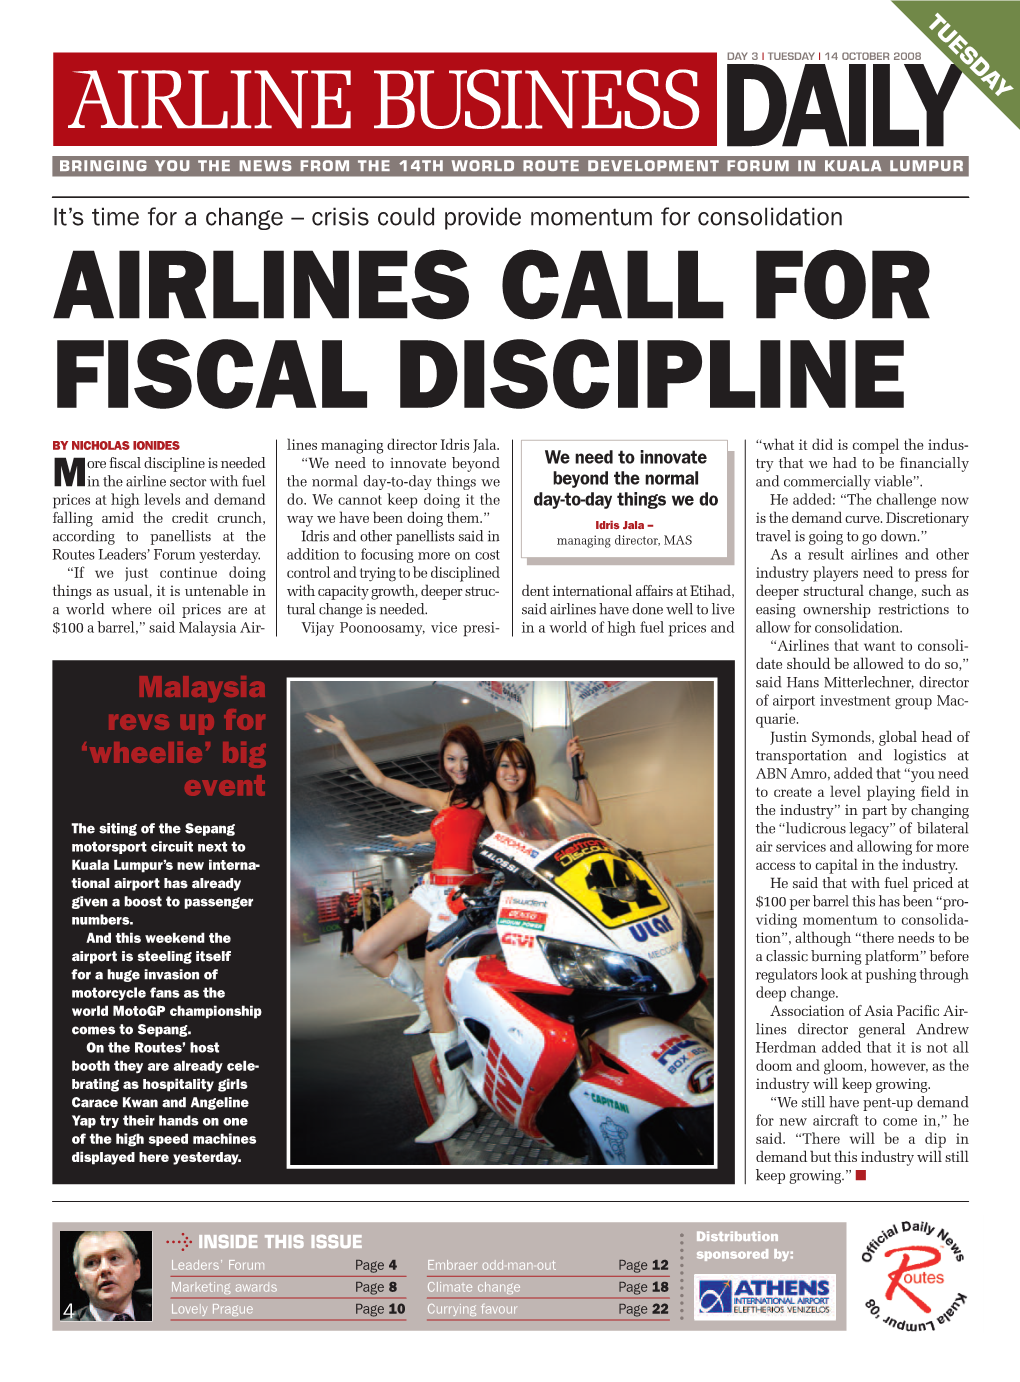 Airlines Call for Fiscal Discipline